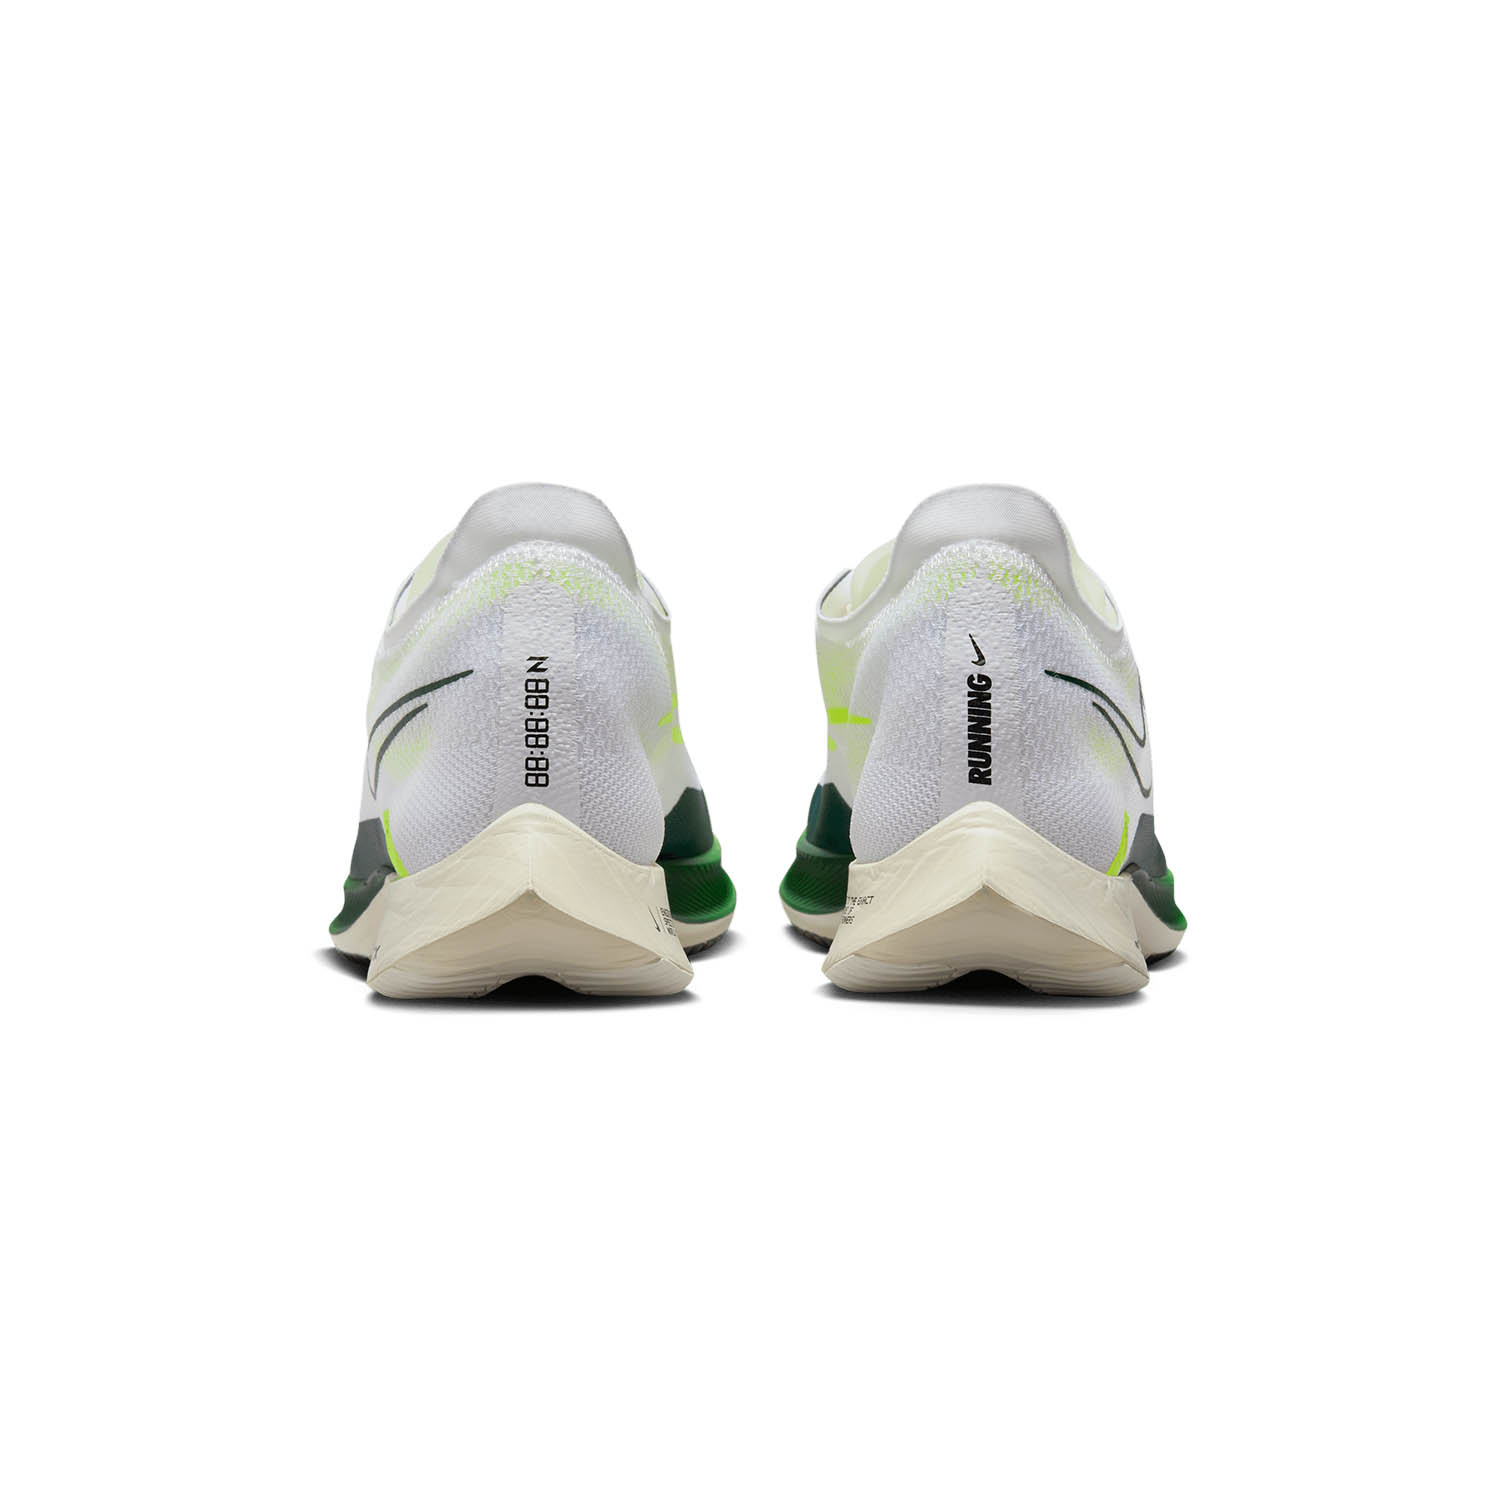 Nike ZoomX Streakfly - White/Pro Green/Volt/Sail